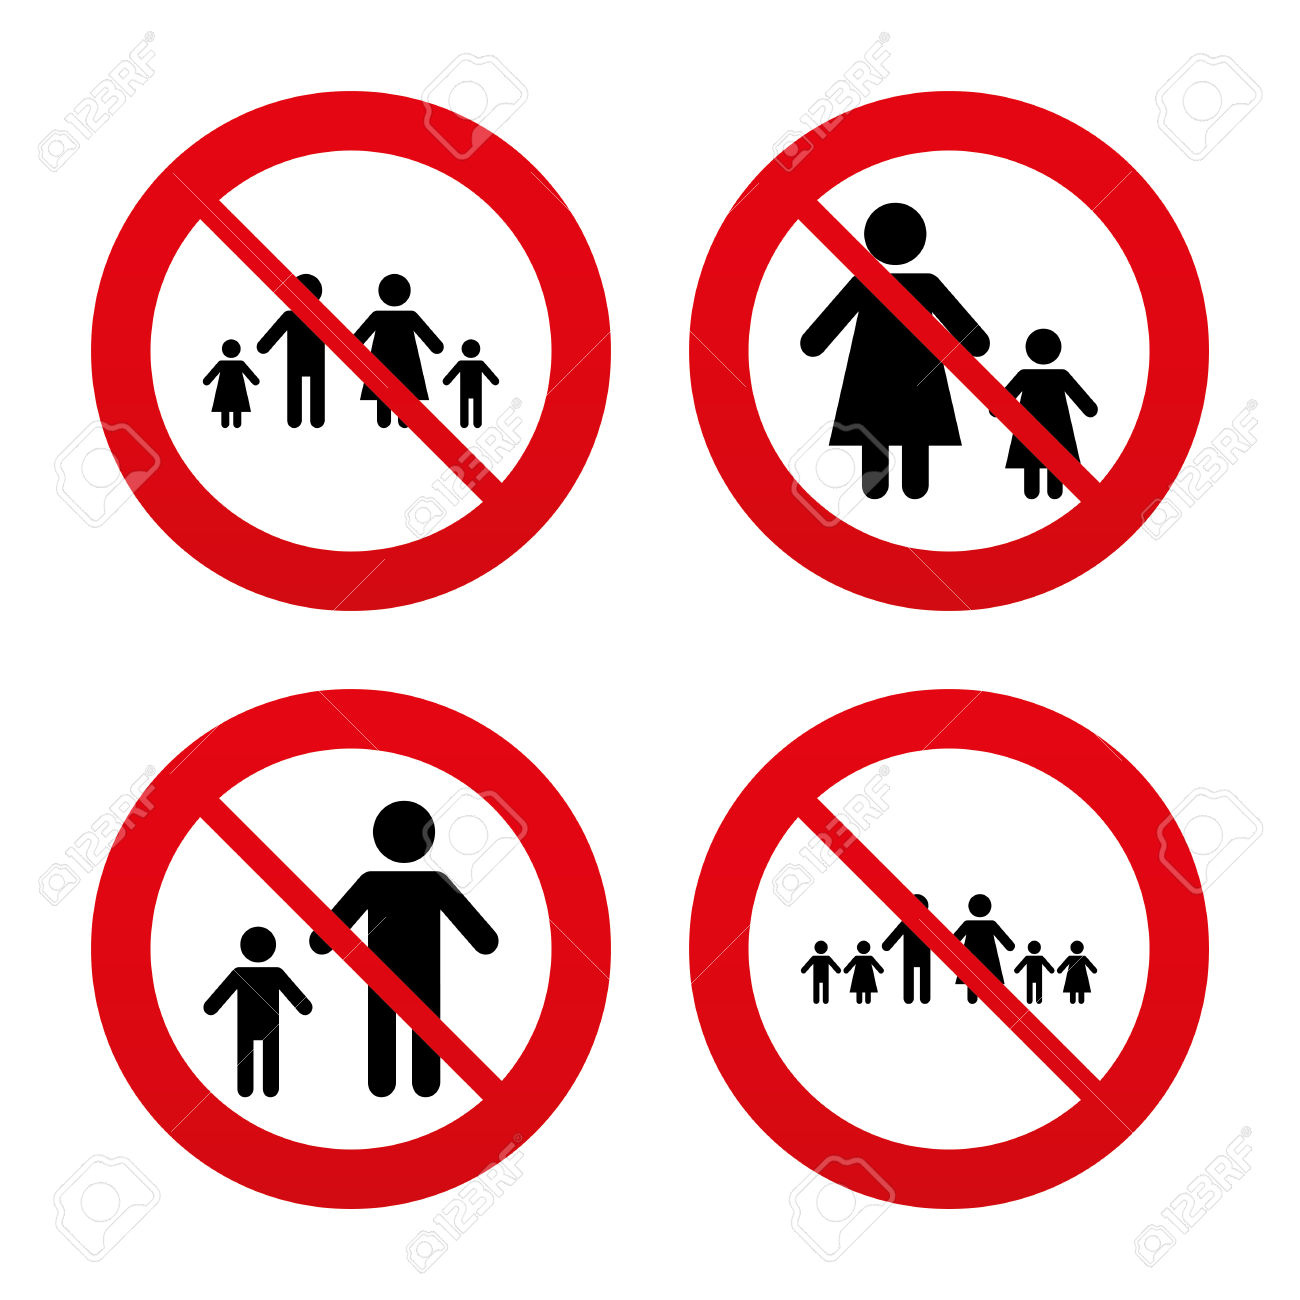 No, Ban Or Stop Signs. Large Family With Children Icon. Parents.